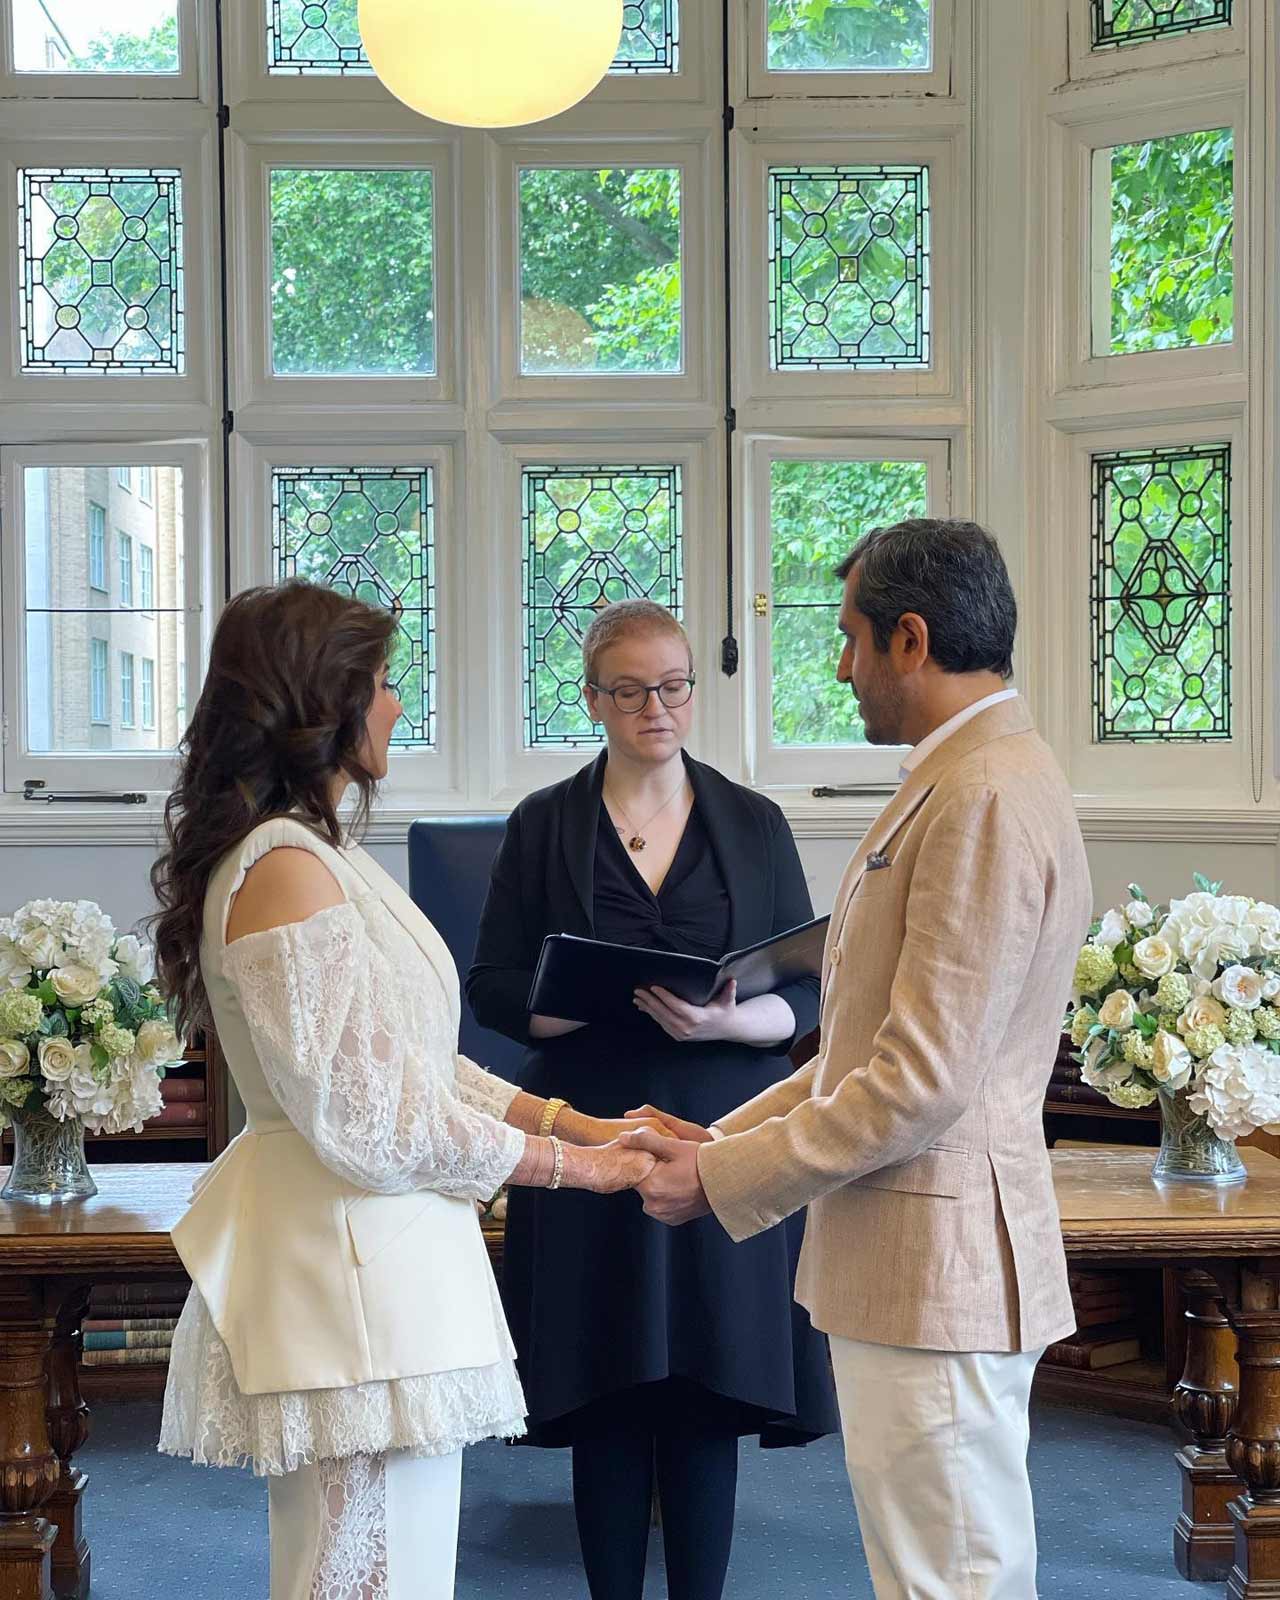 Indian singer Kanika Kapoor, who recently got married to her long term beau Gautam Hathiramani, in London again took her wedding vows with him in a church marriage and dropped some beautiful pics from the ceremony, on her social media account, on Sunday.